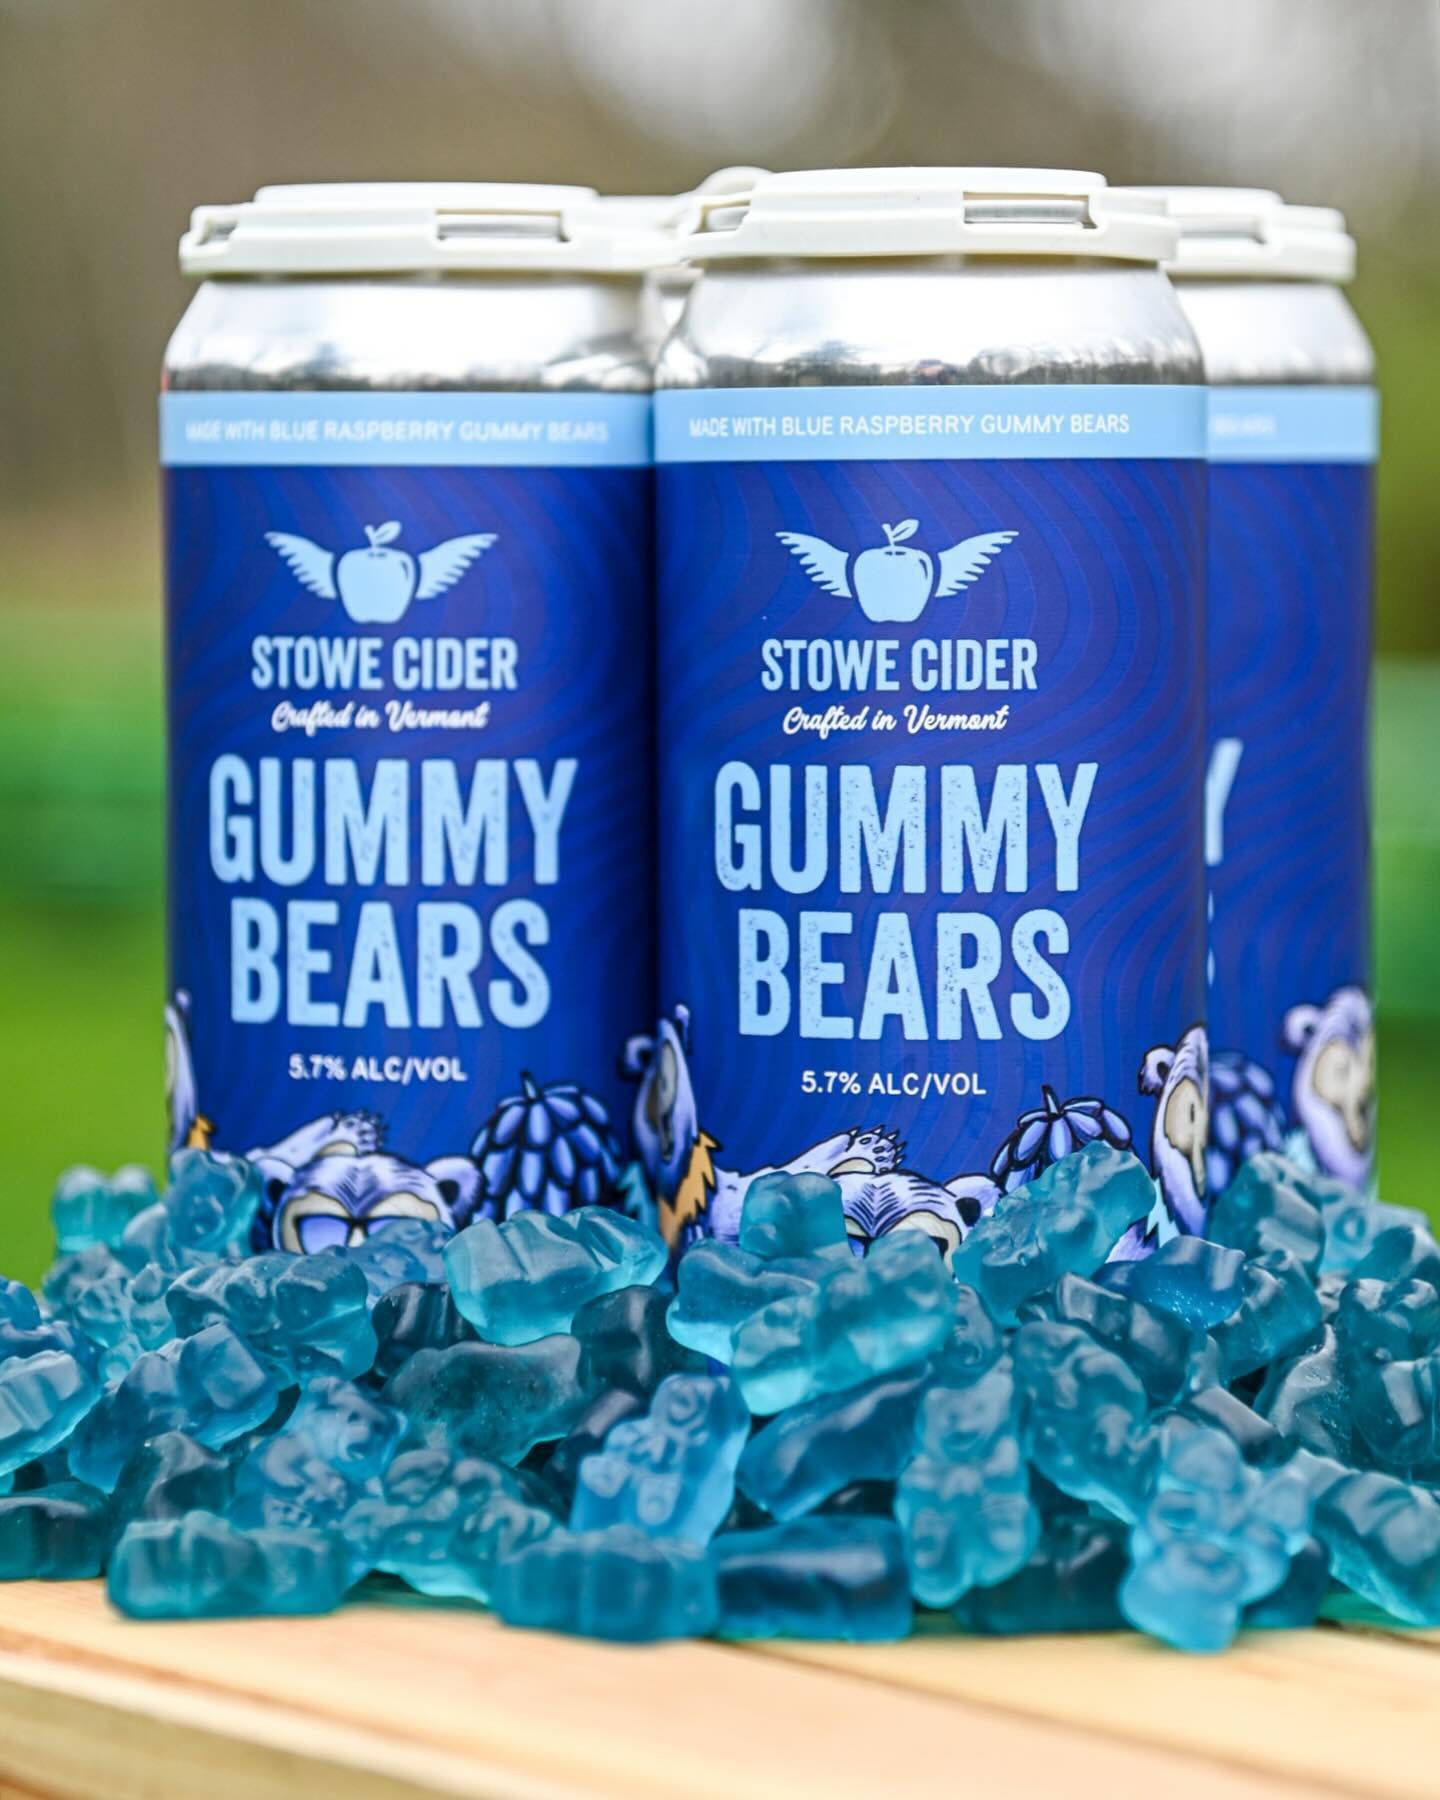 Did you get your hands on this one-of-a-kind cider yet? It&rsquo;s tart, it&rsquo;s bright, it&rsquo;s waiting for you. Gummy Bears is here and won&rsquo;t be for long! 

Make sure you grab a 4-pack locally or stop into our taproom to give it a try. 